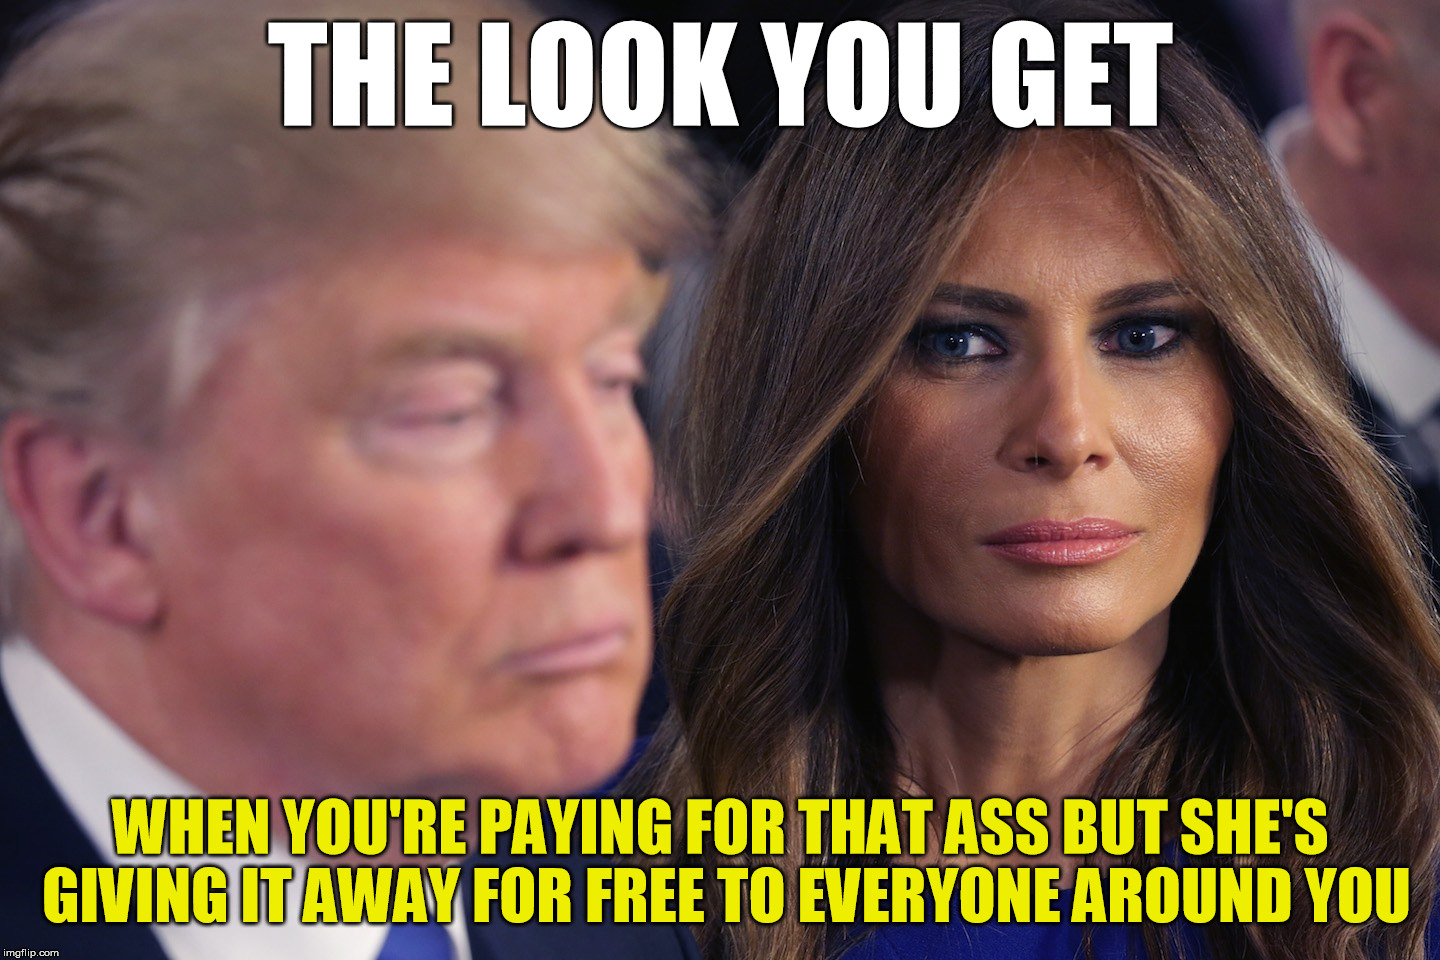 Urination costs extra | THE LOOK YOU GET; WHEN YOU'RE PAYING FOR THAT ASS BUT SHE'S GIVING IT AWAY FOR FREE TO EVERYONE AROUND YOU | image tagged in trump,cuck,melania | made w/ Imgflip meme maker